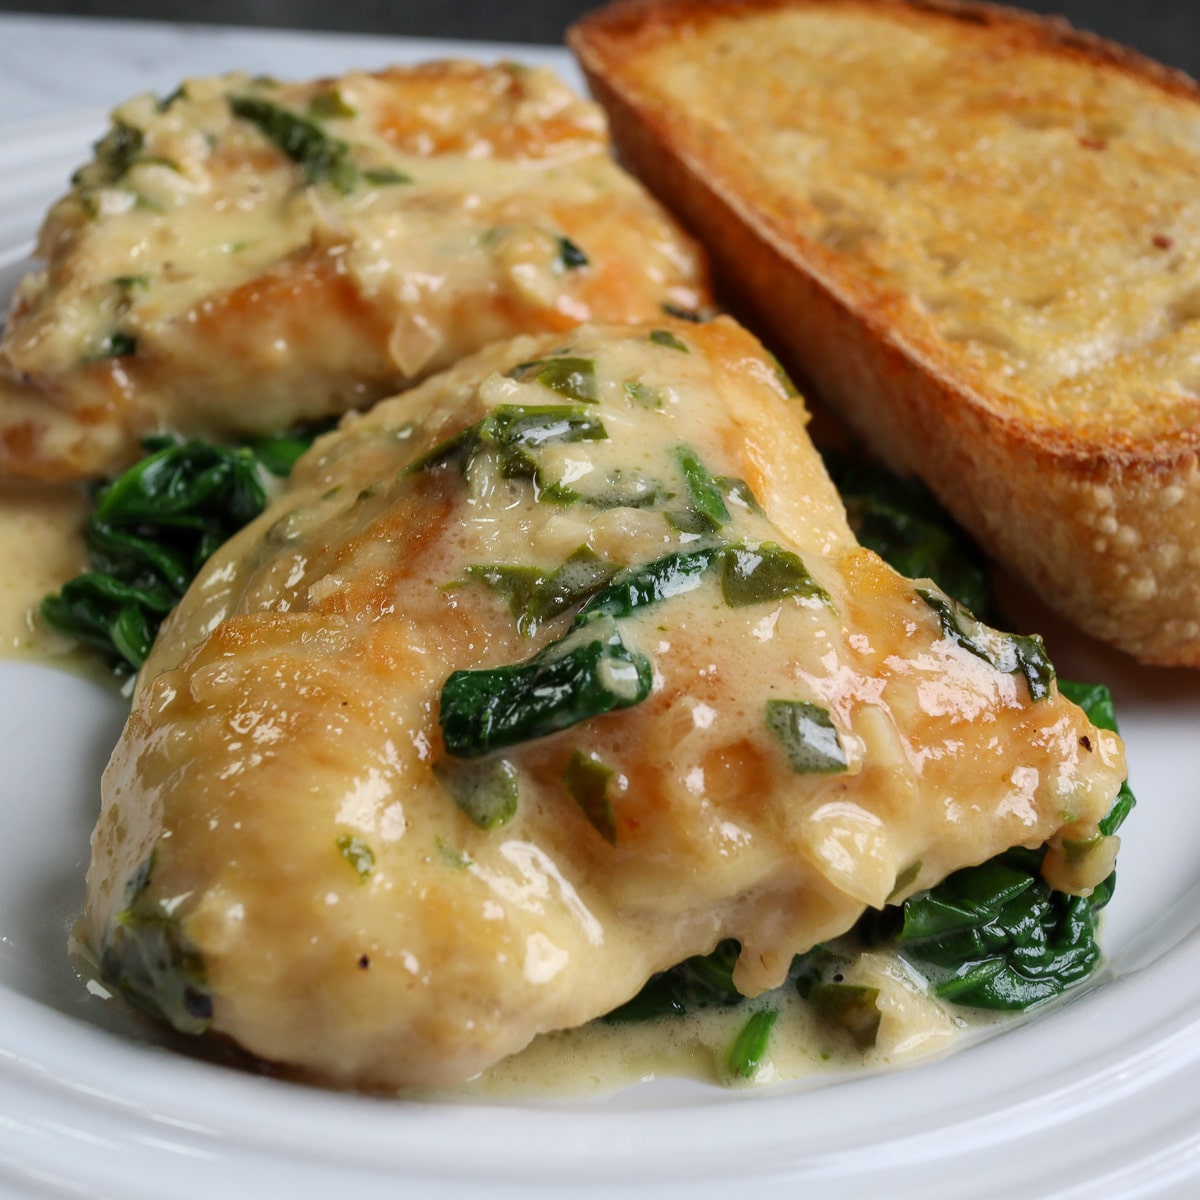 finished dish with the chicken florentine on a plate